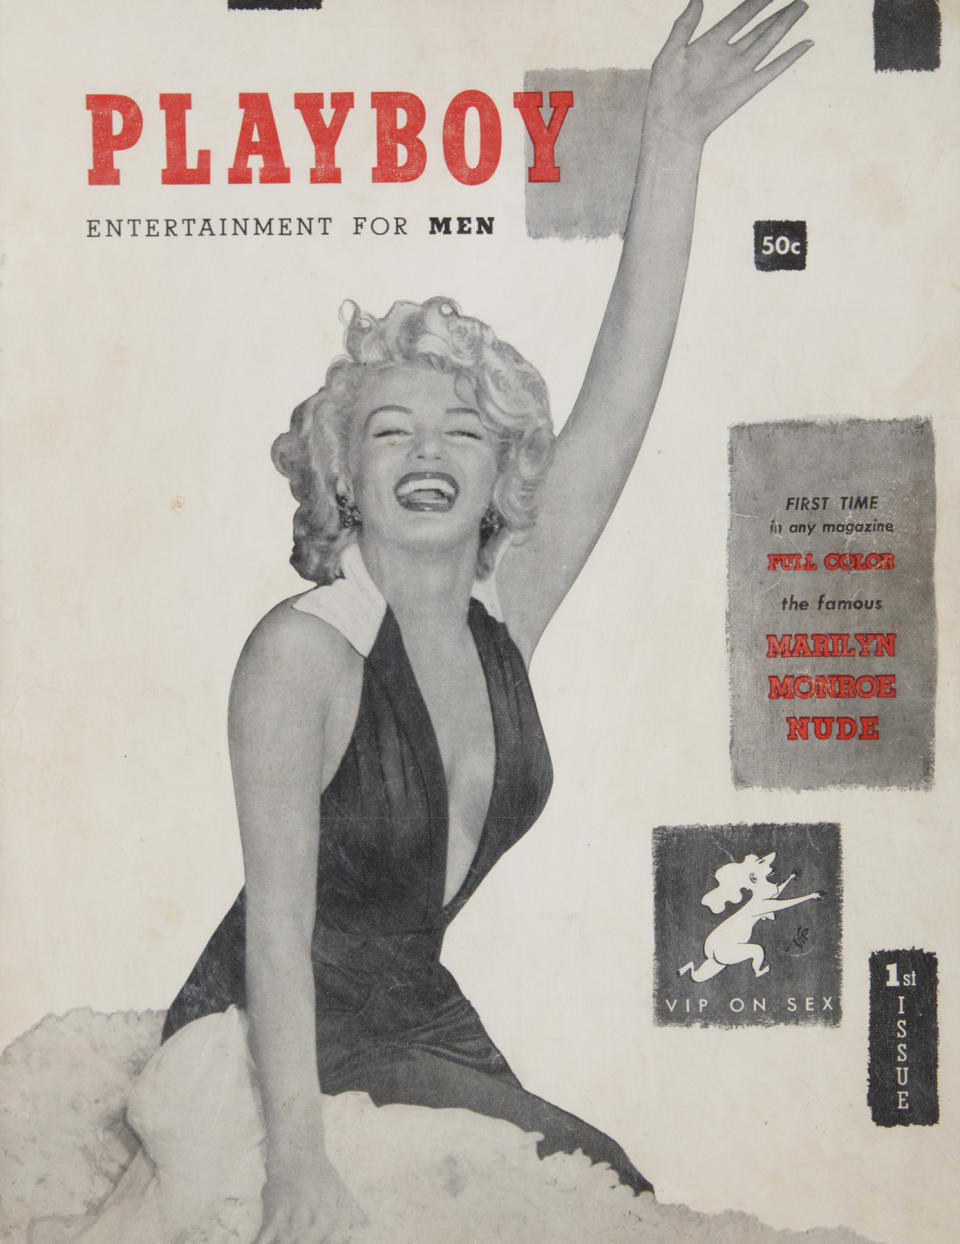 Marilyn Monroe stars in the first issue of <em>Playboy</em> magazine. (Photo: Julien’s Auctions)